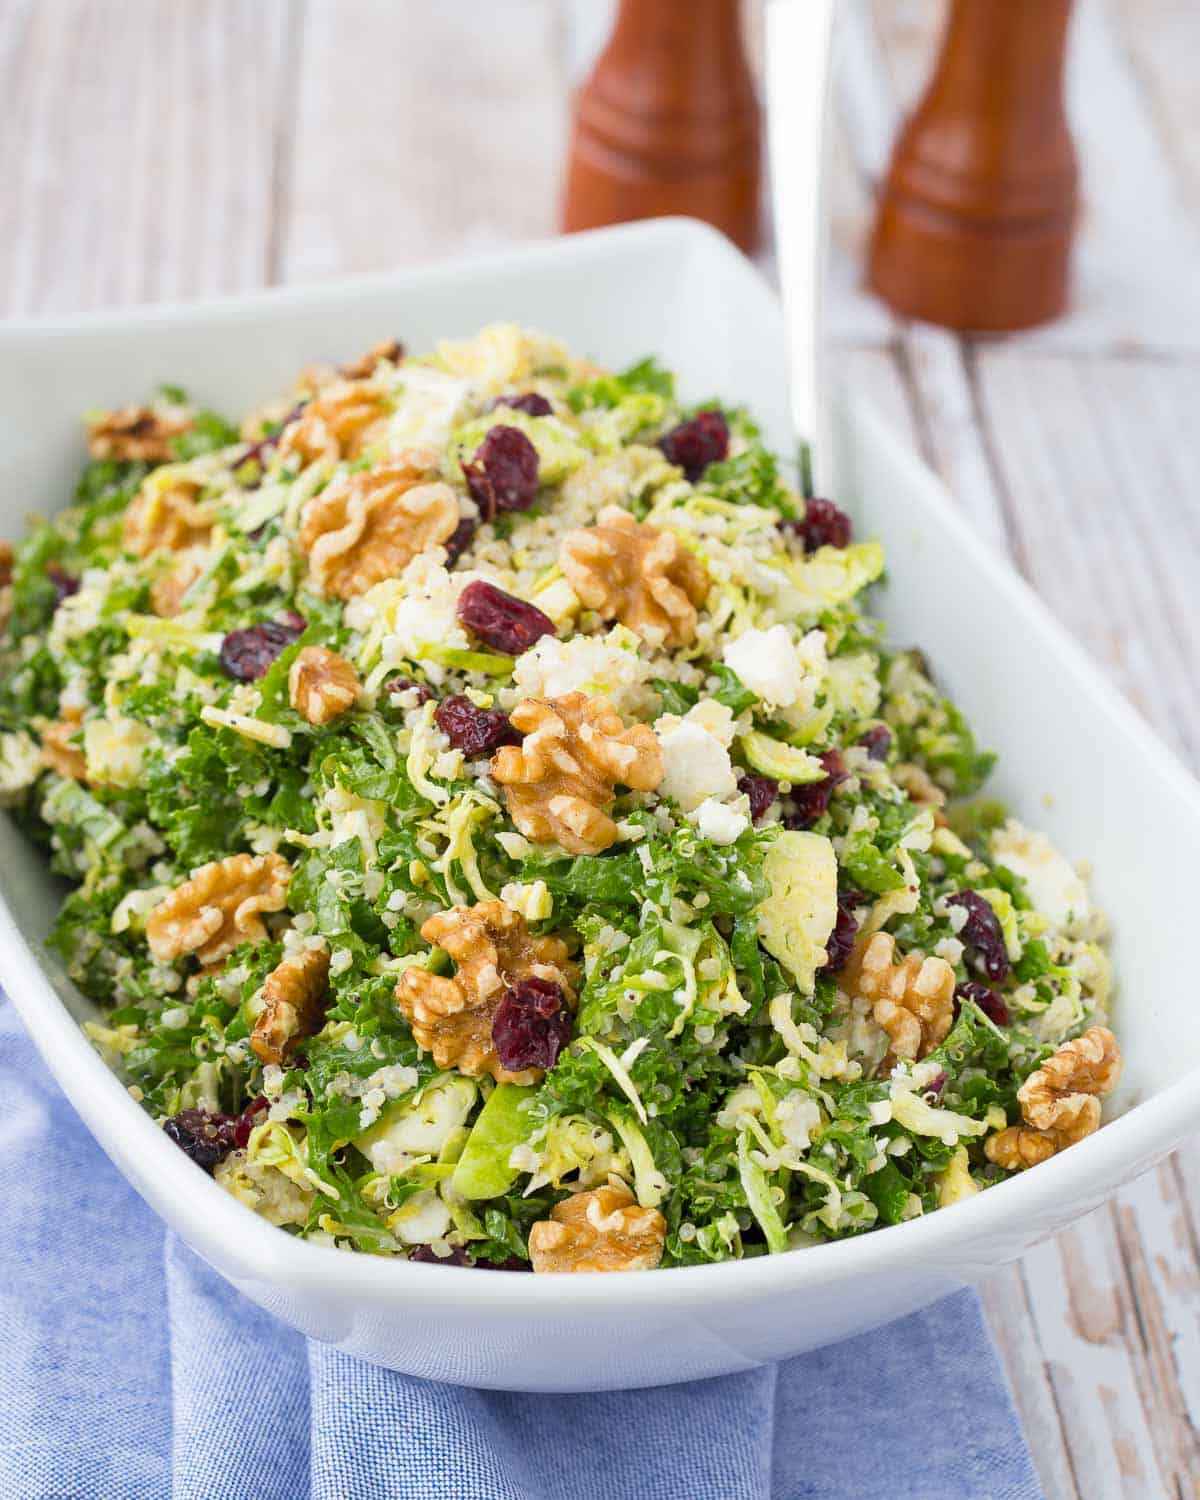 Kale salad in a large white bowl, topped with walnuts and dried cranberries.